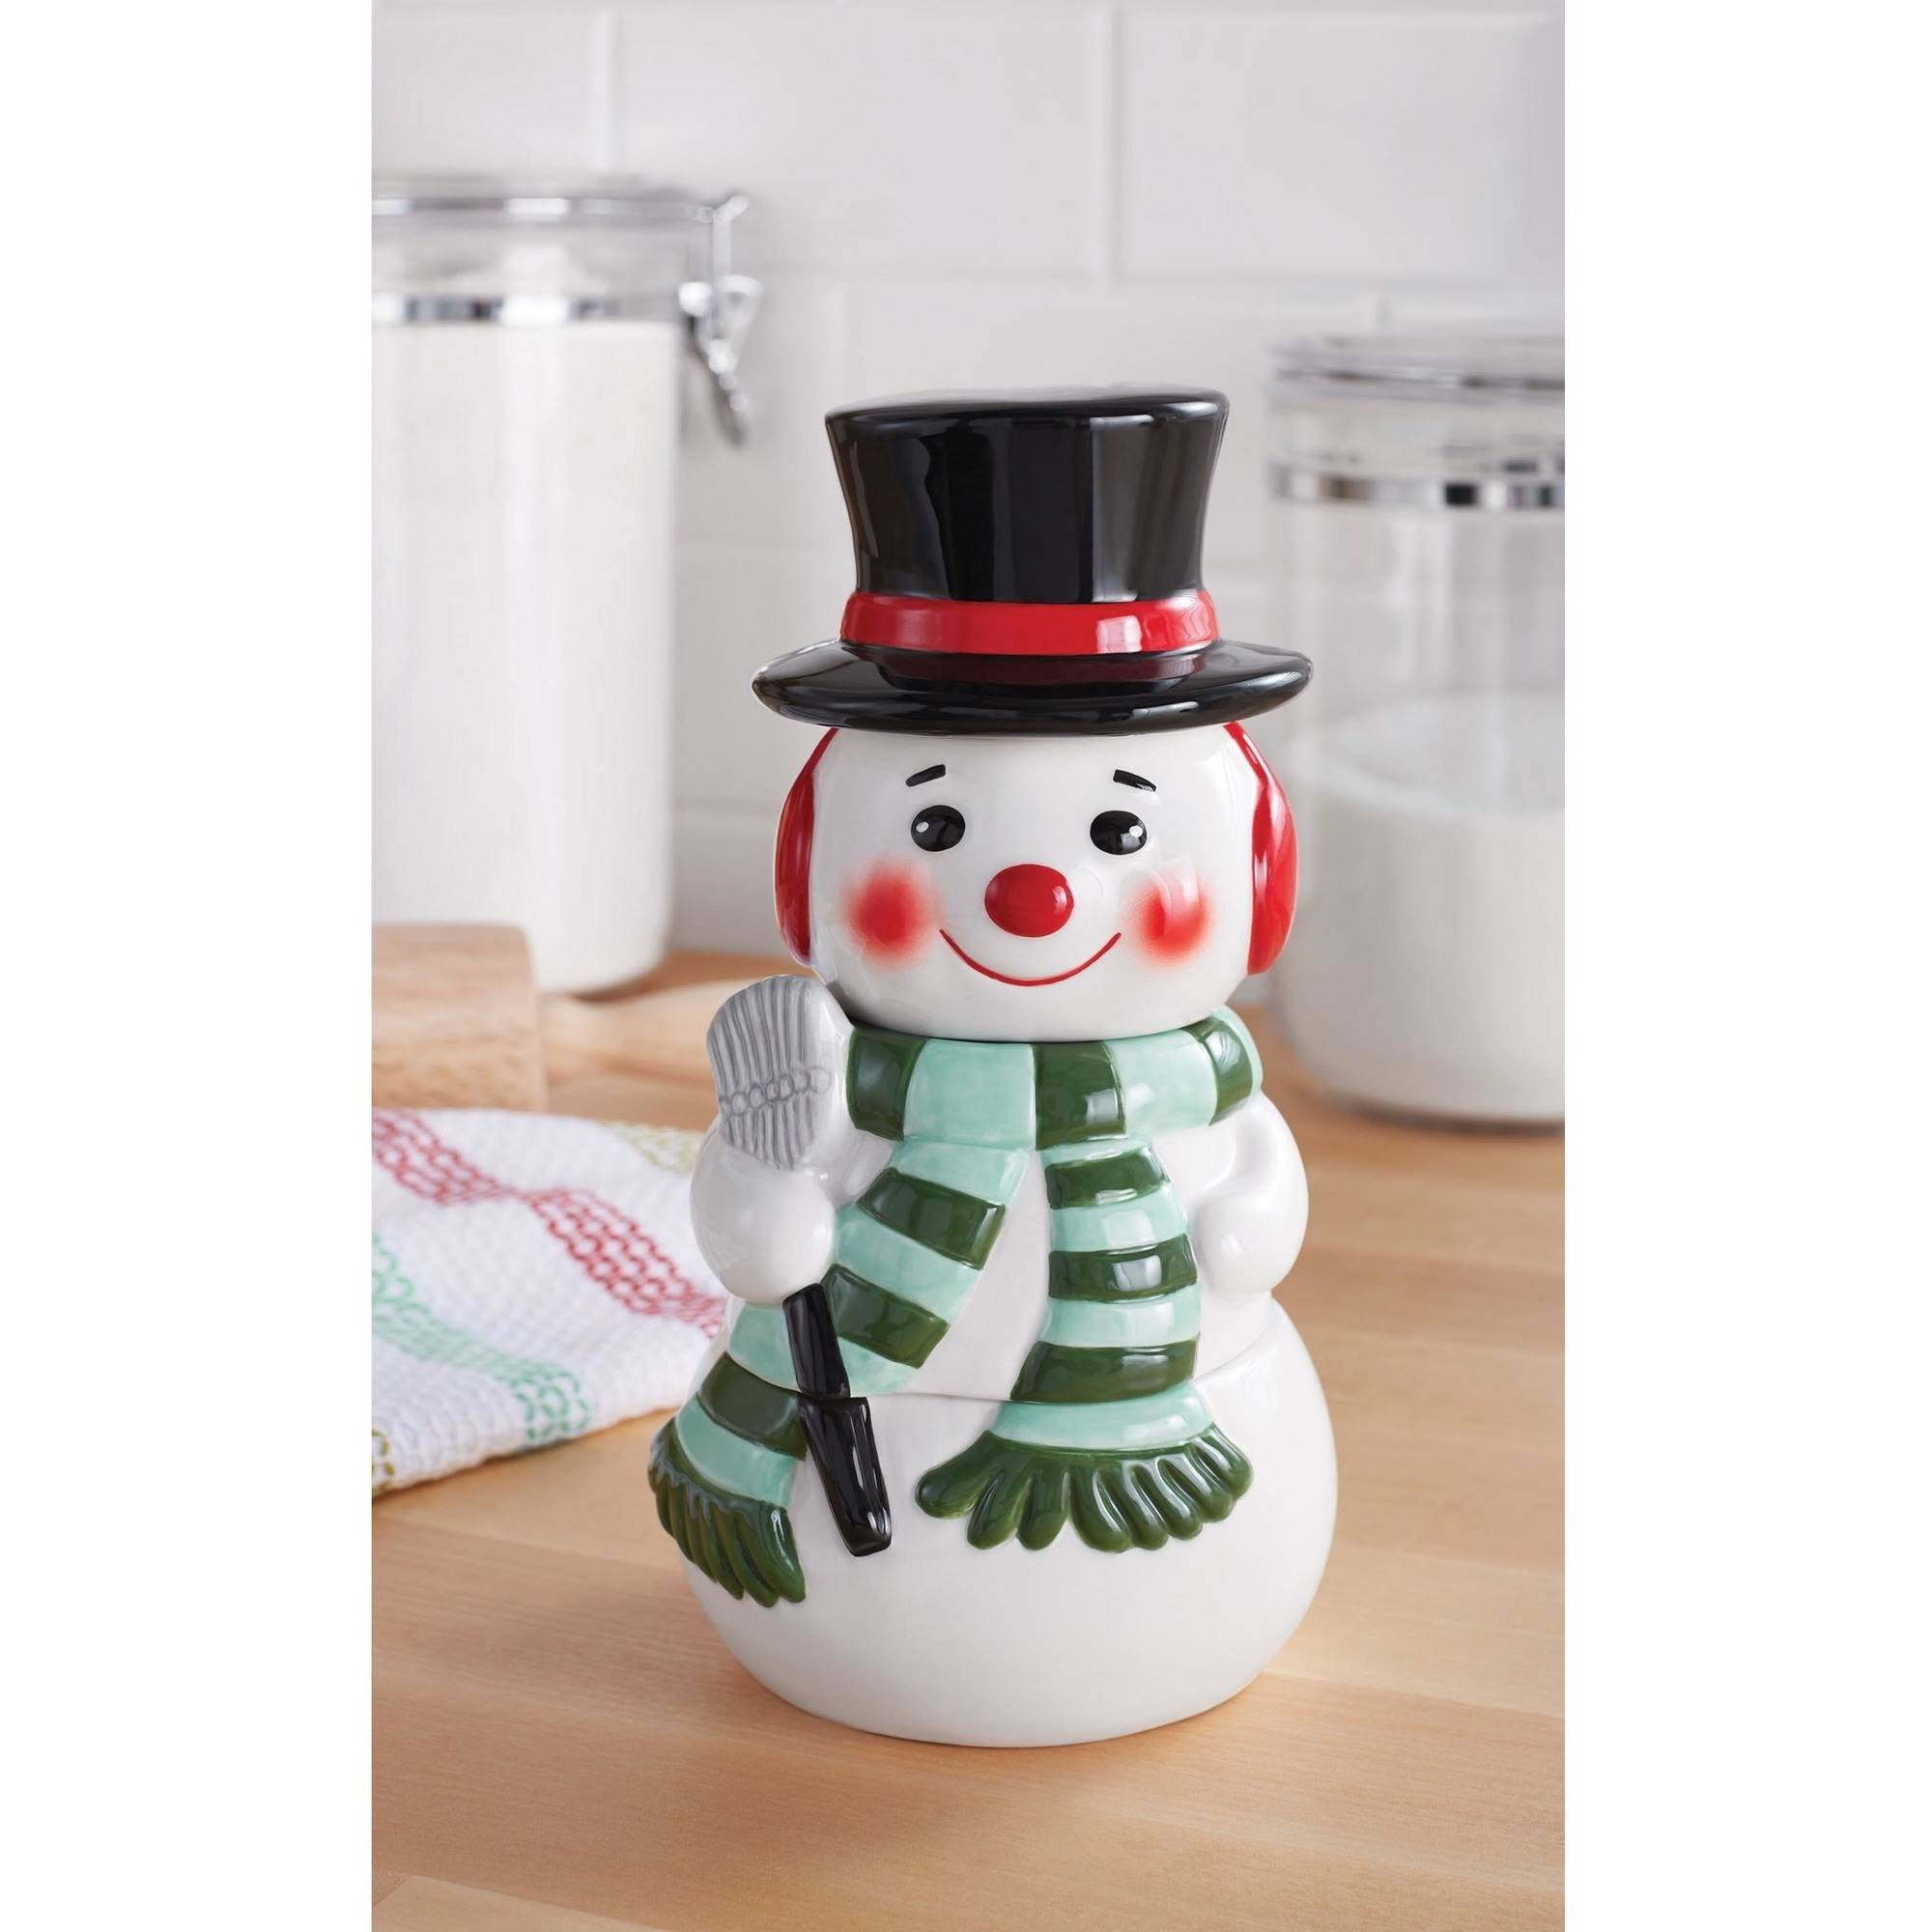 Rae Dunn Snowman Measuring Cups Set Of 4 Holiday Collection